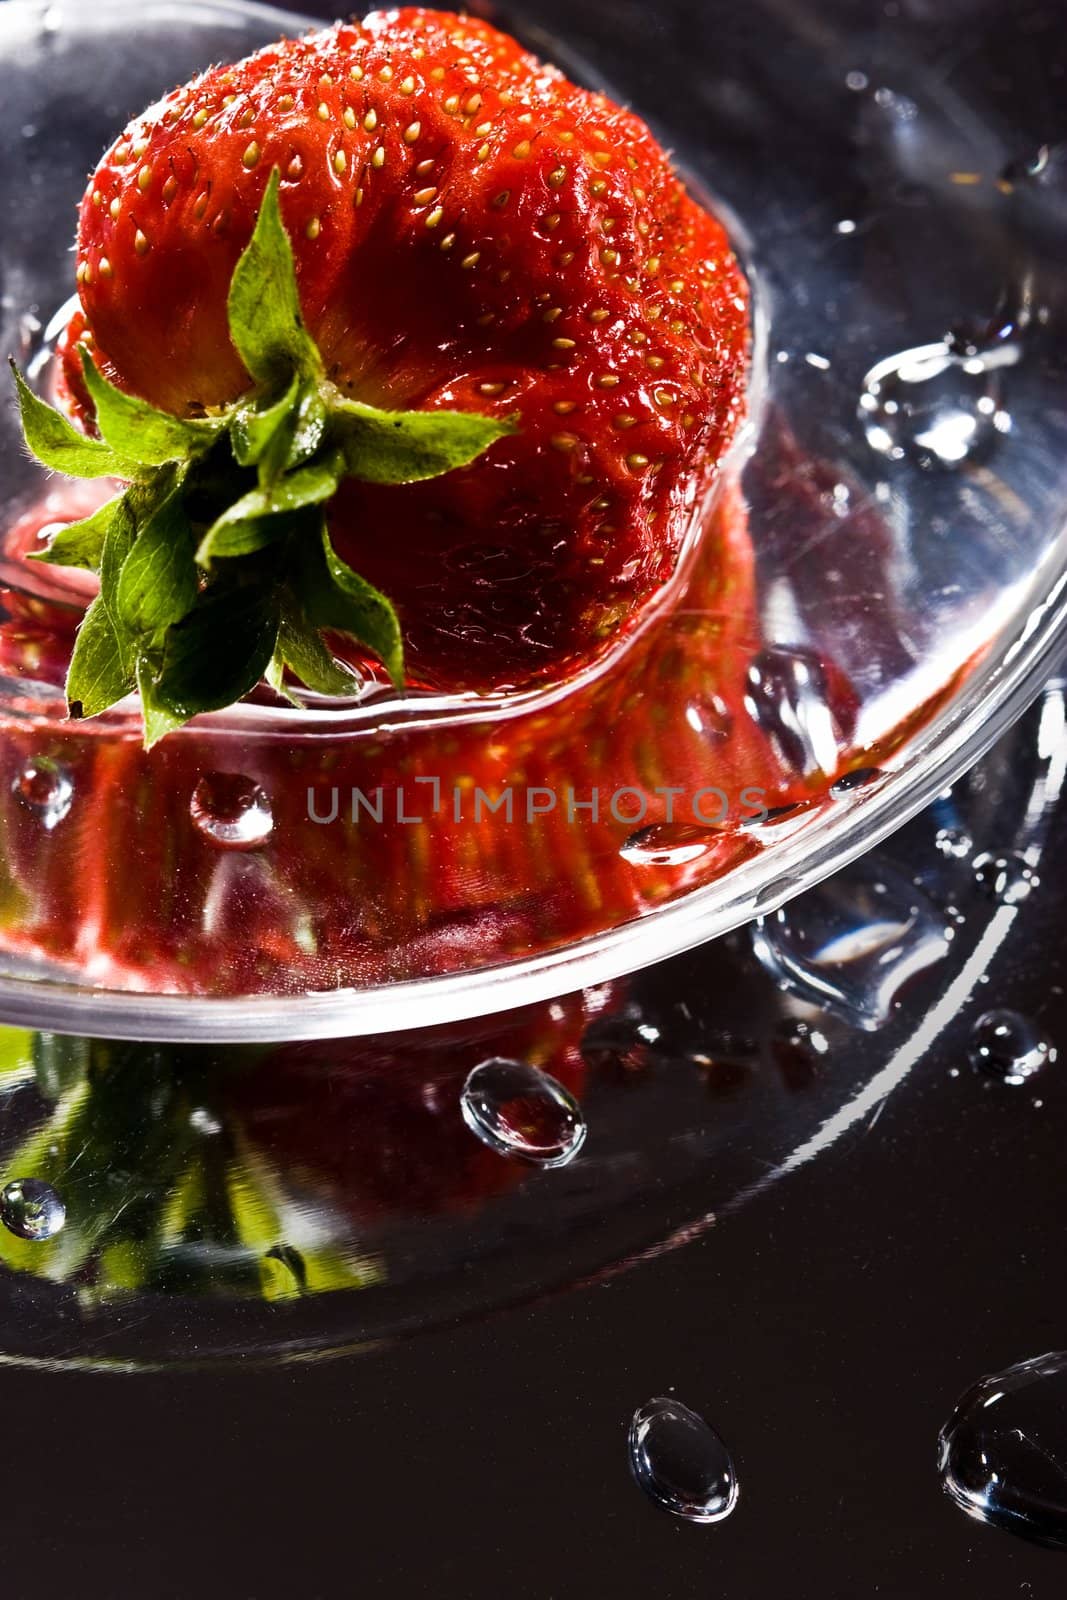 food series: strawberry on the reflective surface